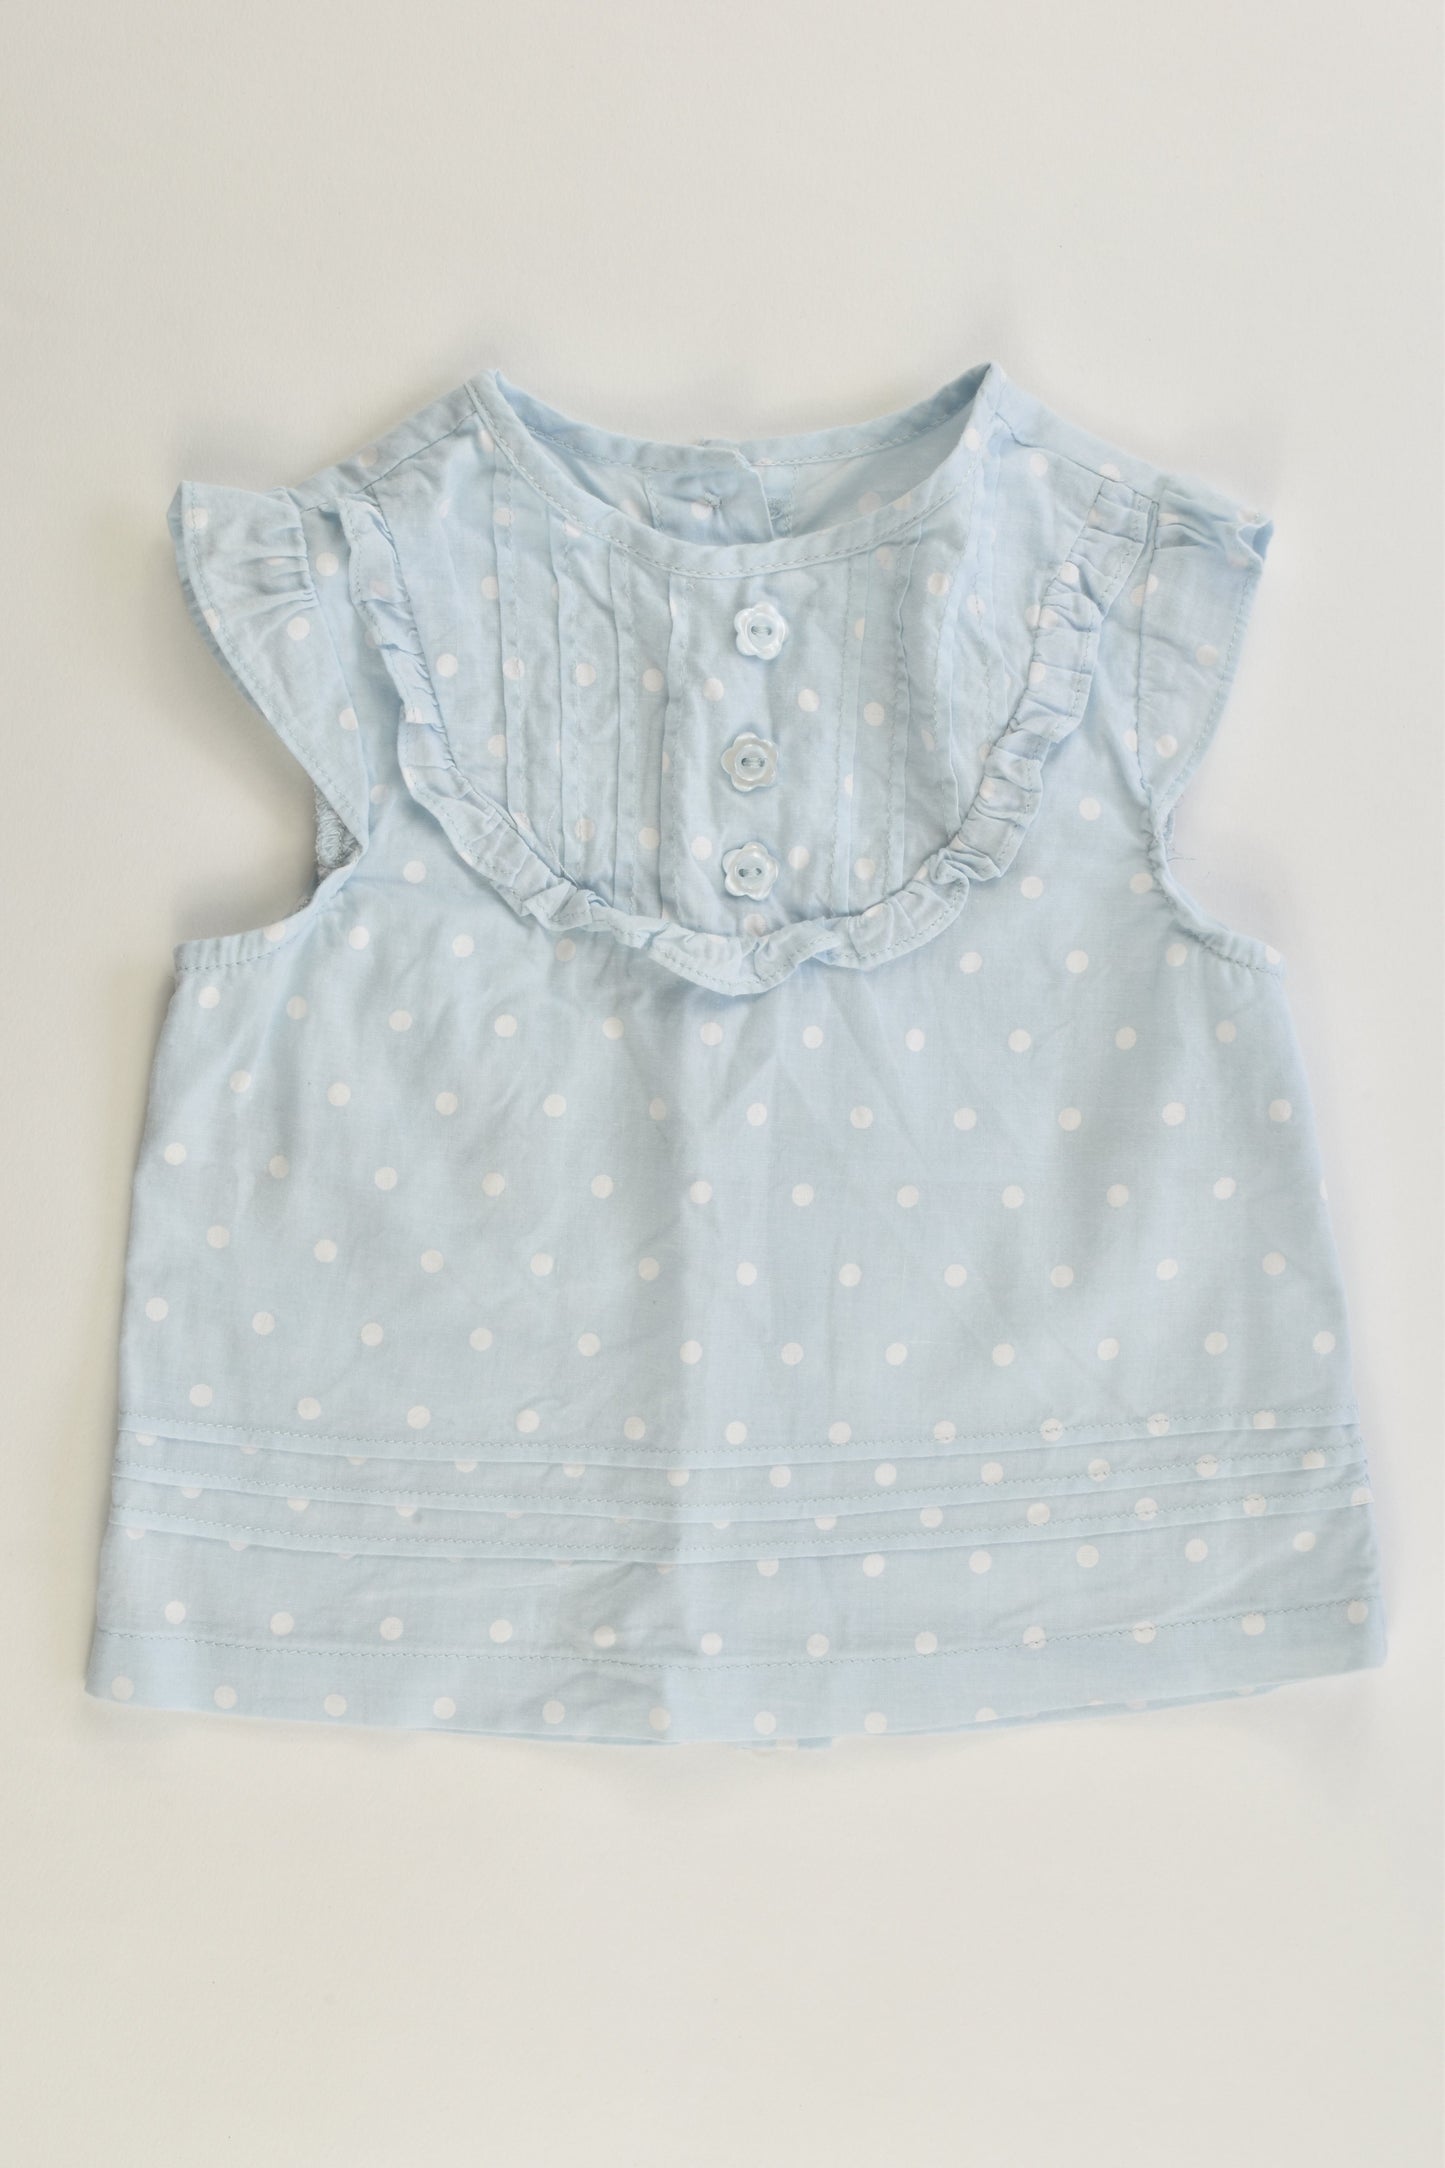 Puddle Ducklings Size 0 Blouse